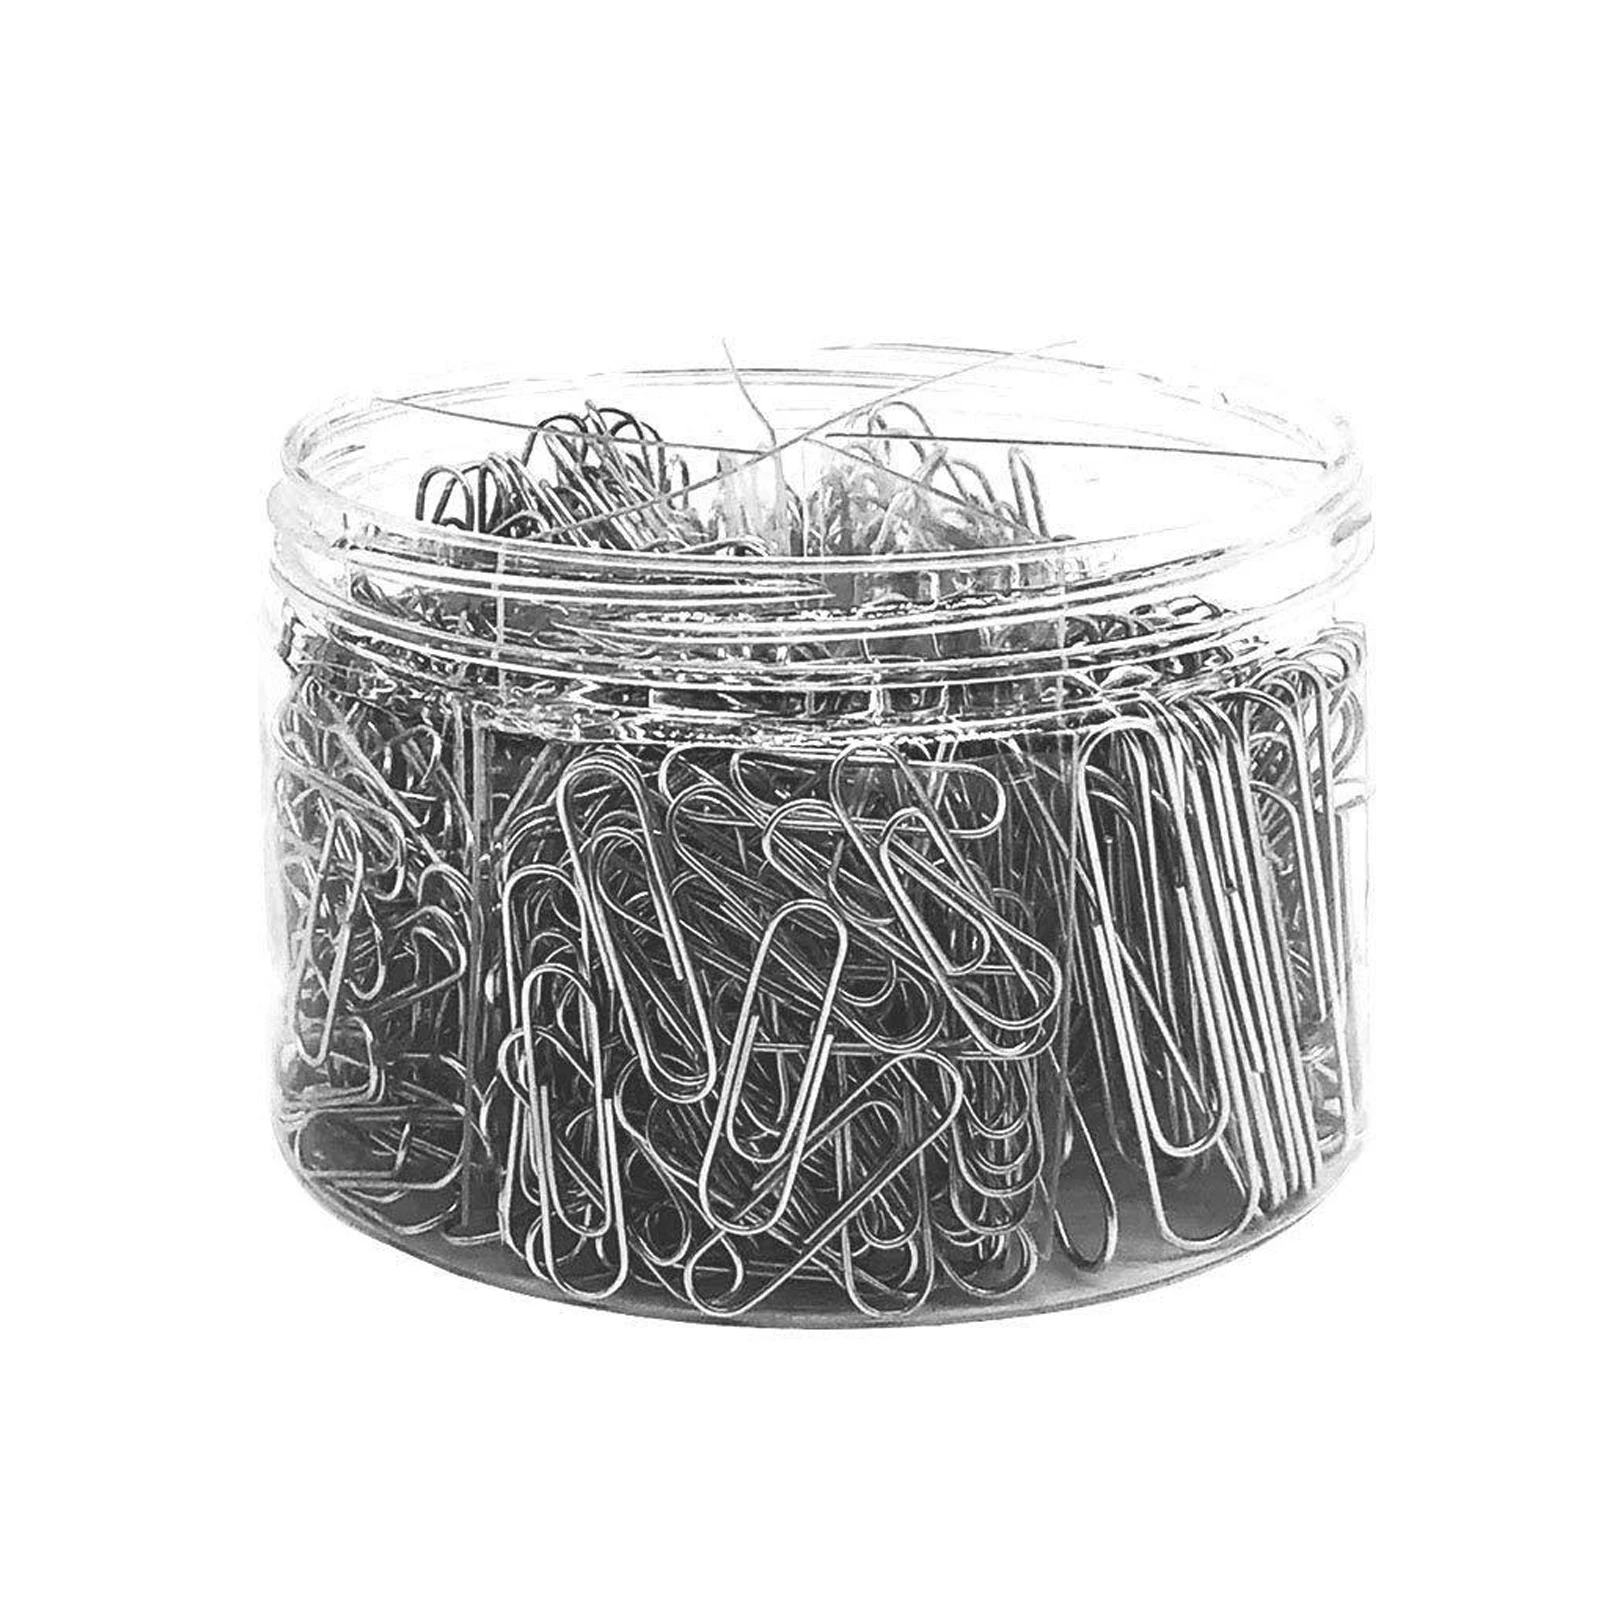 

700pcs Silver Clamp Home 28mm 33mm 50mm Paper Clip School Office Stationery Binding Supplies Assorted Size Durable With Box